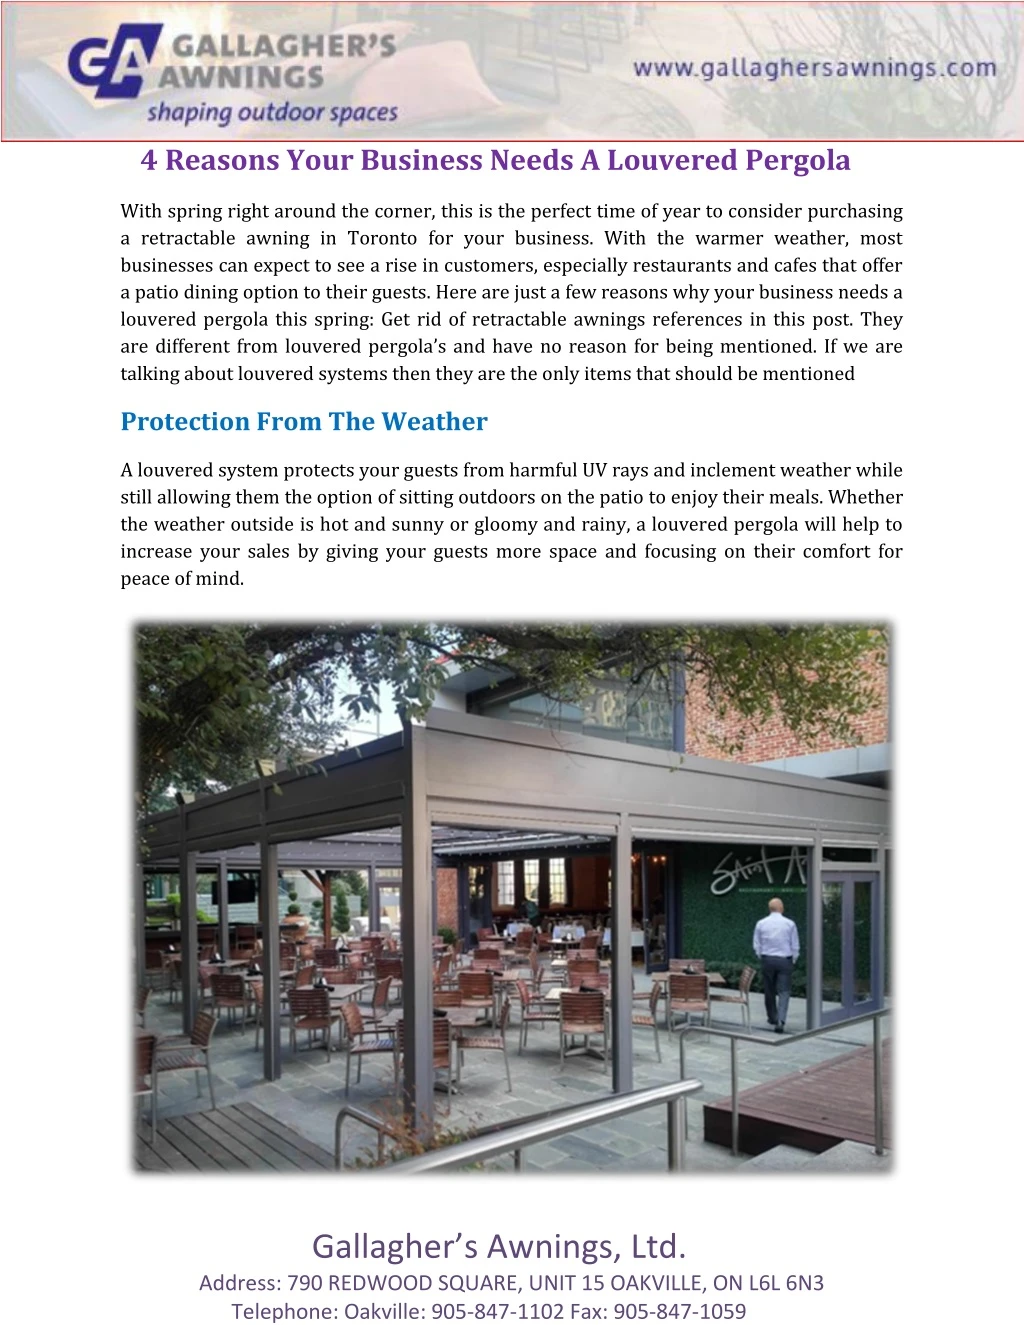 4 reasons your business needs a louvered pergola